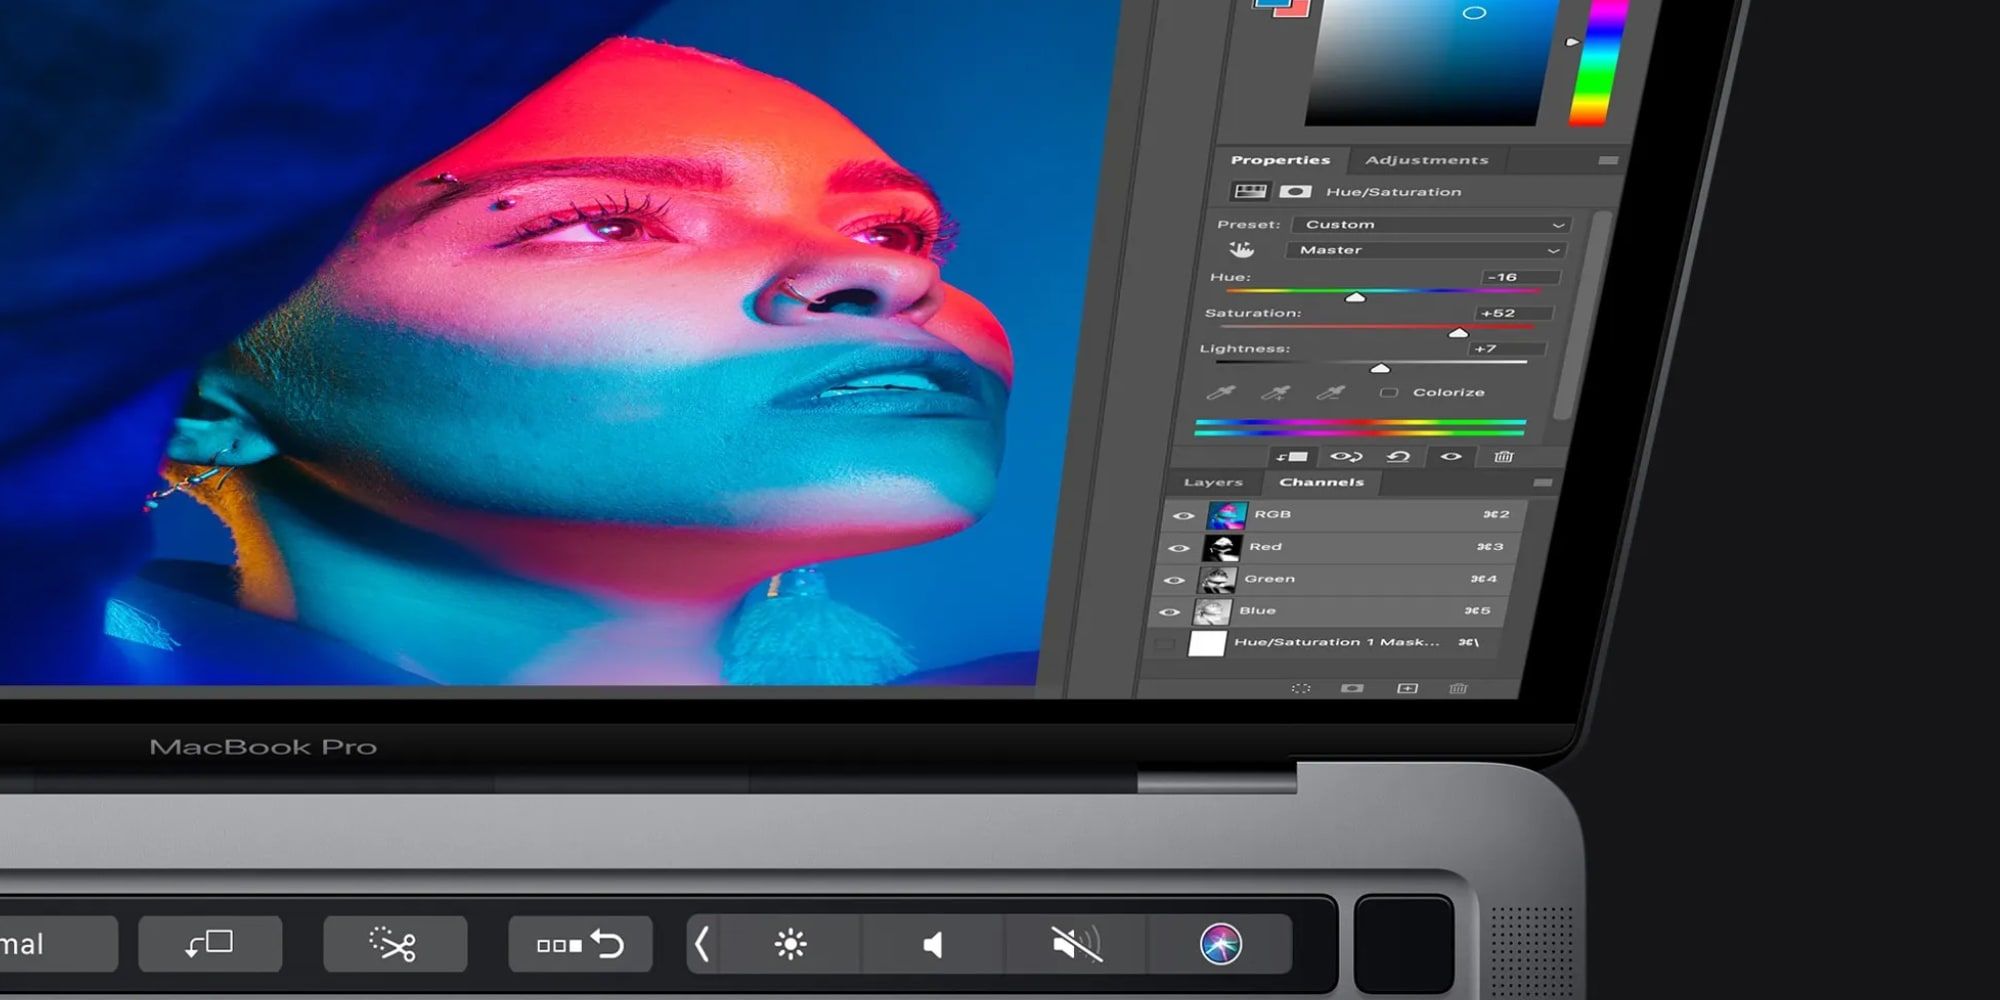 Adobe Photoshop Gains M1 Mac Support Here’s What You need To Know